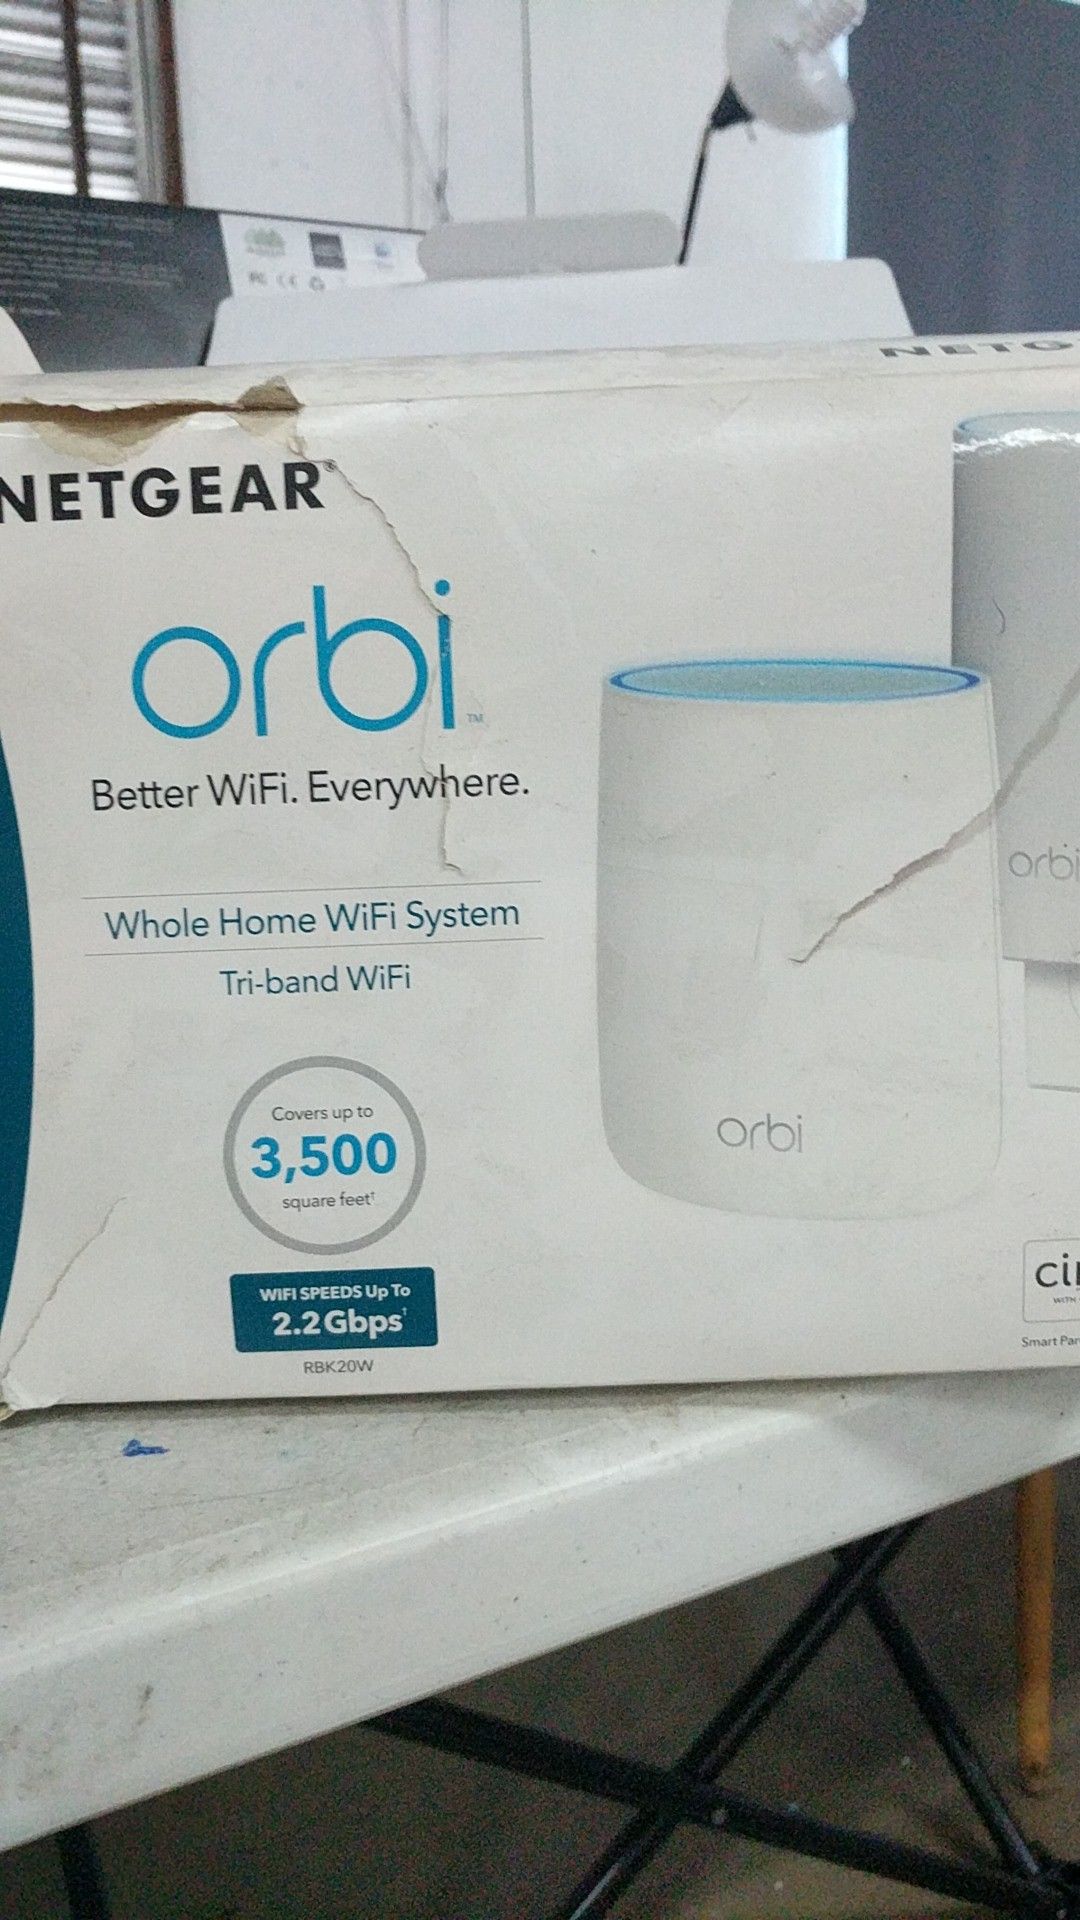 Netgear Orbi router whole home wifi system